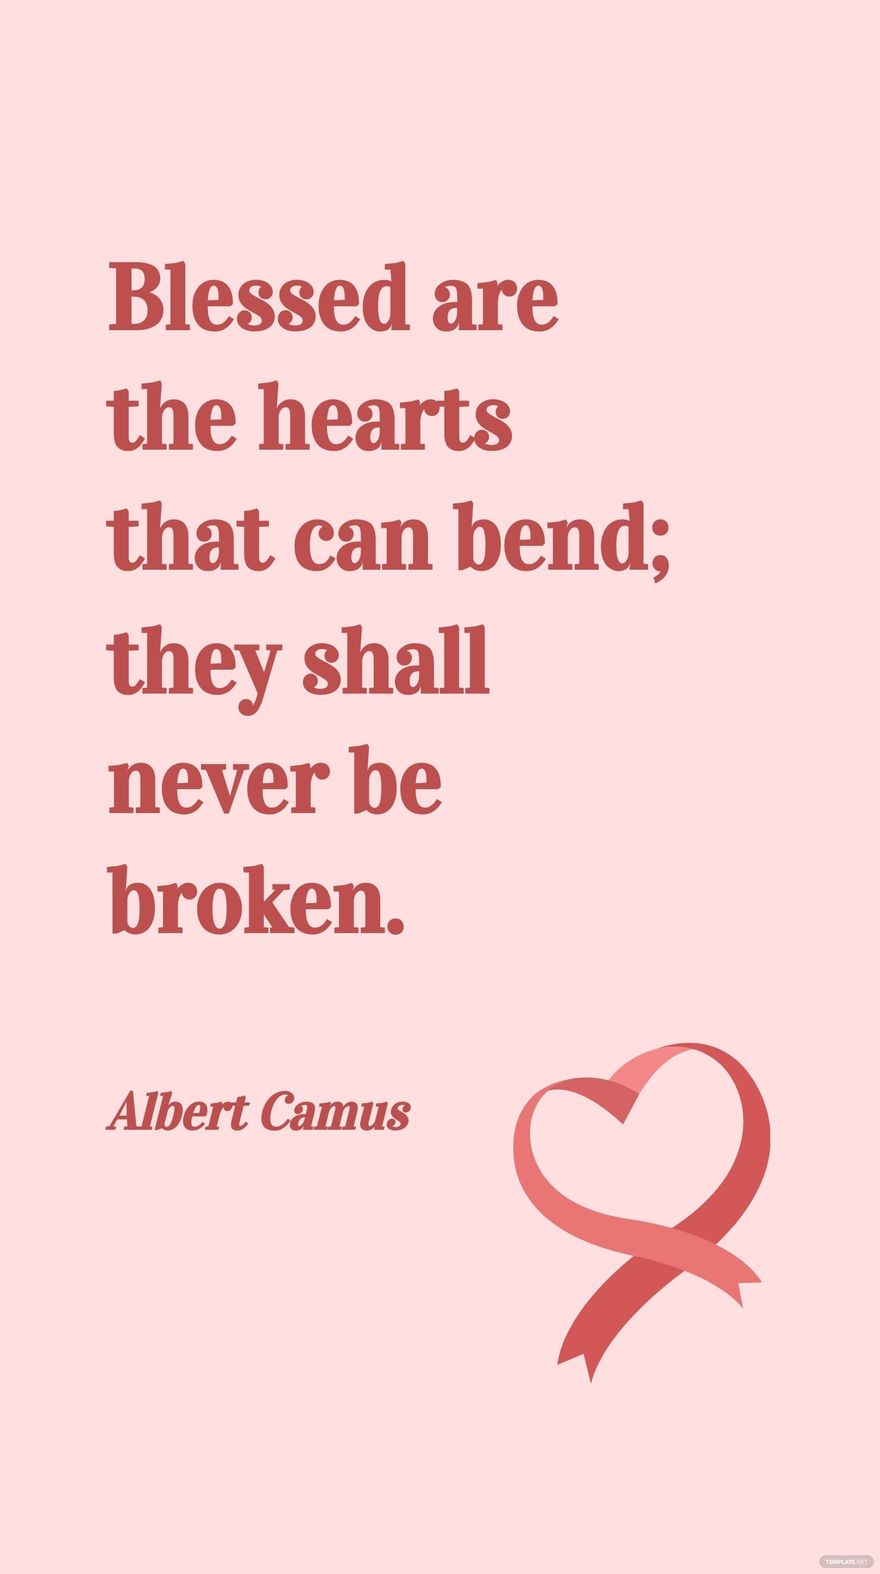 Albert Camus - Blessed are the hearts that can bend; they shall never be broken.